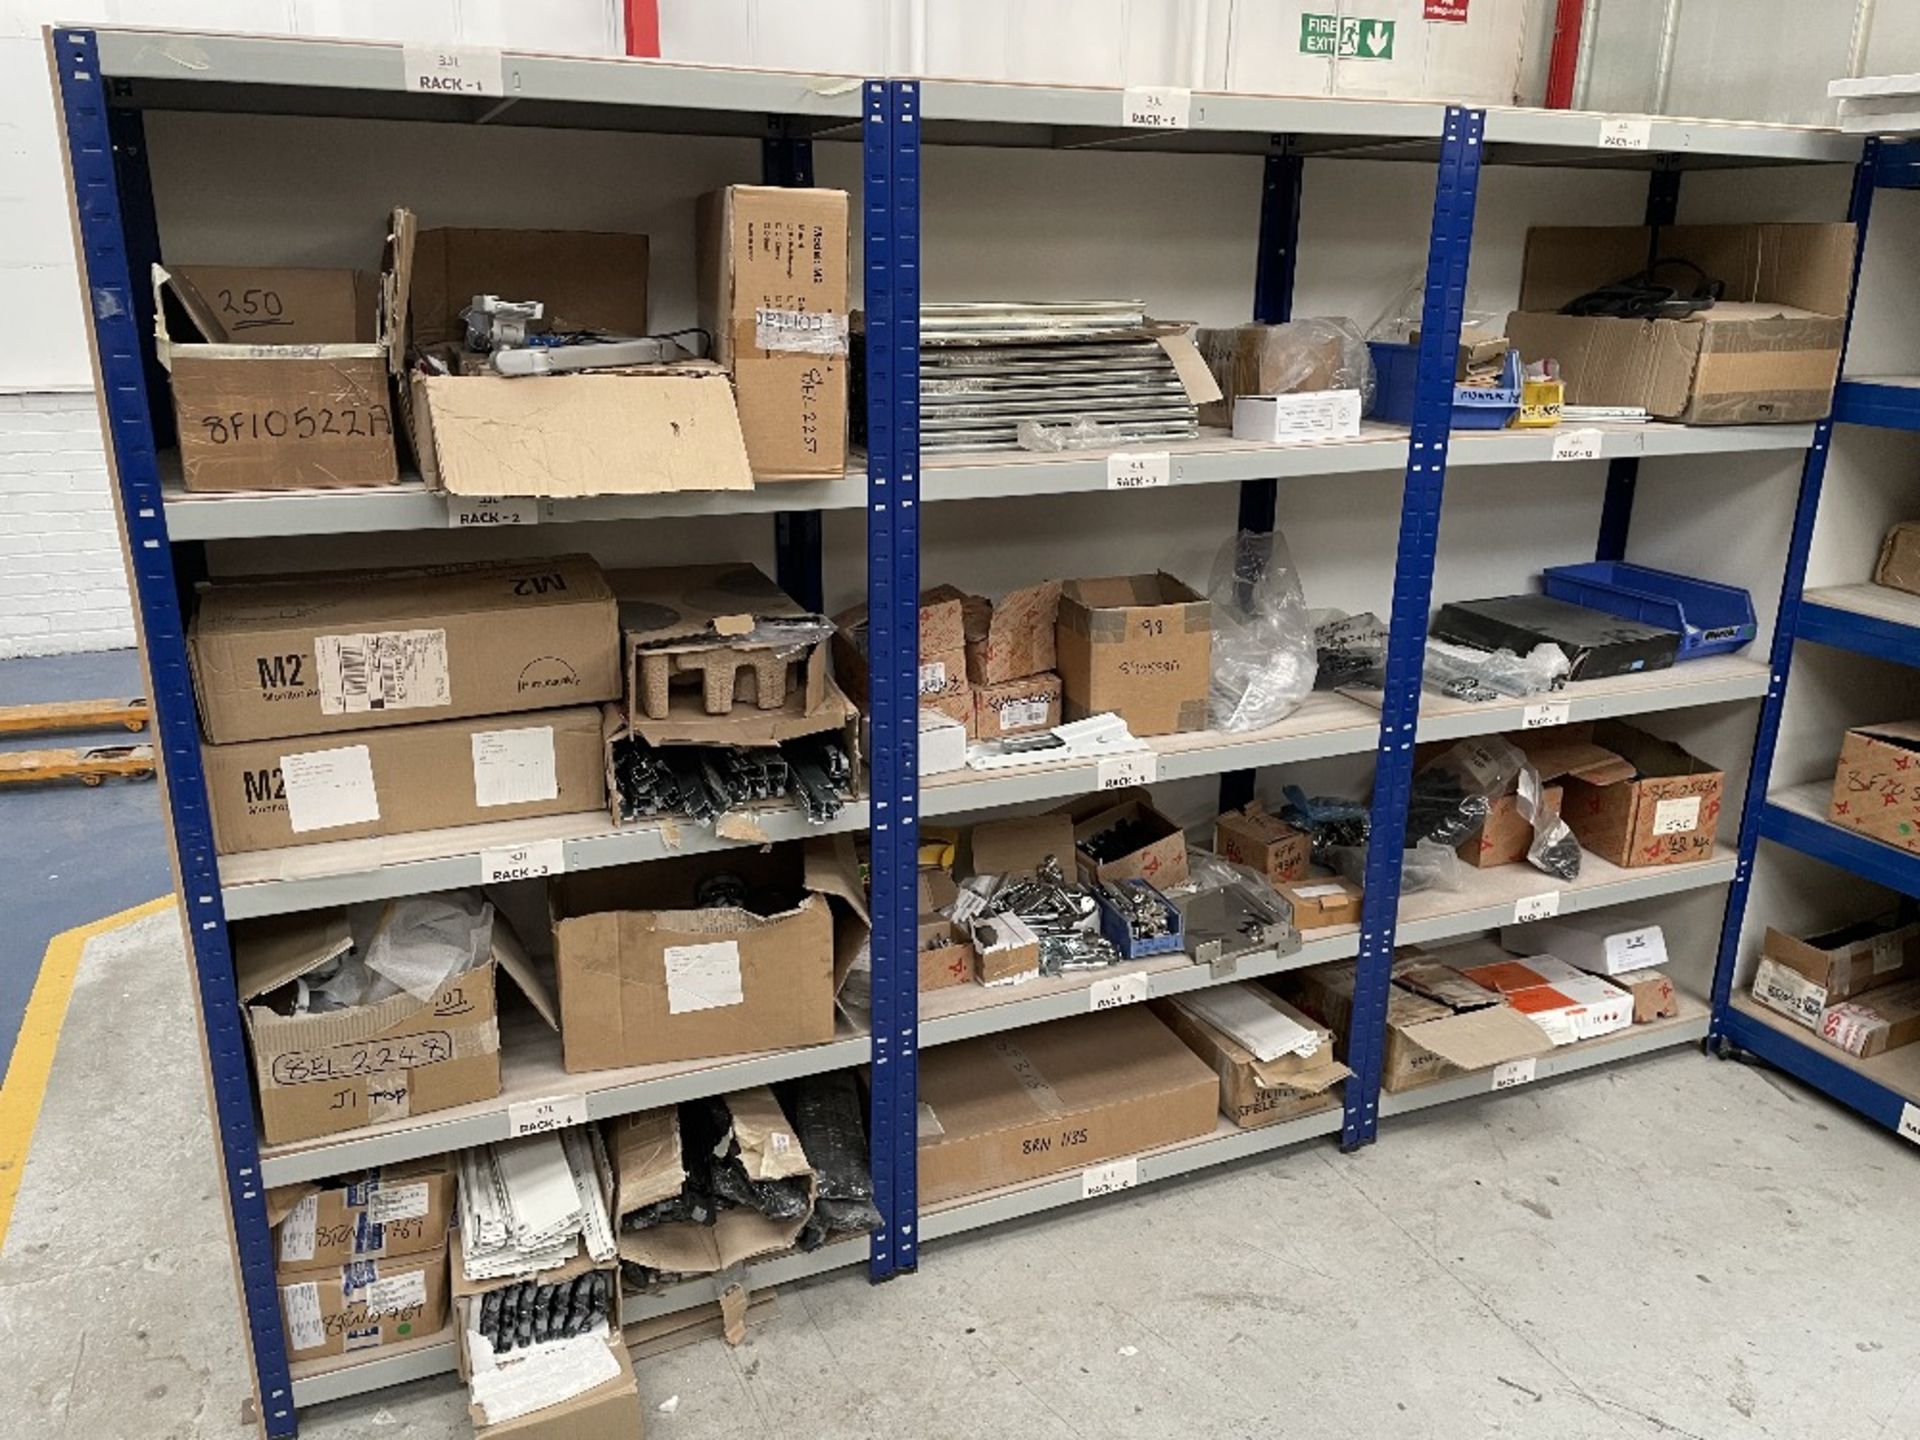 3 Bays of Shelving w/ Furniture Fixings & Fittings Stock | As Pictured